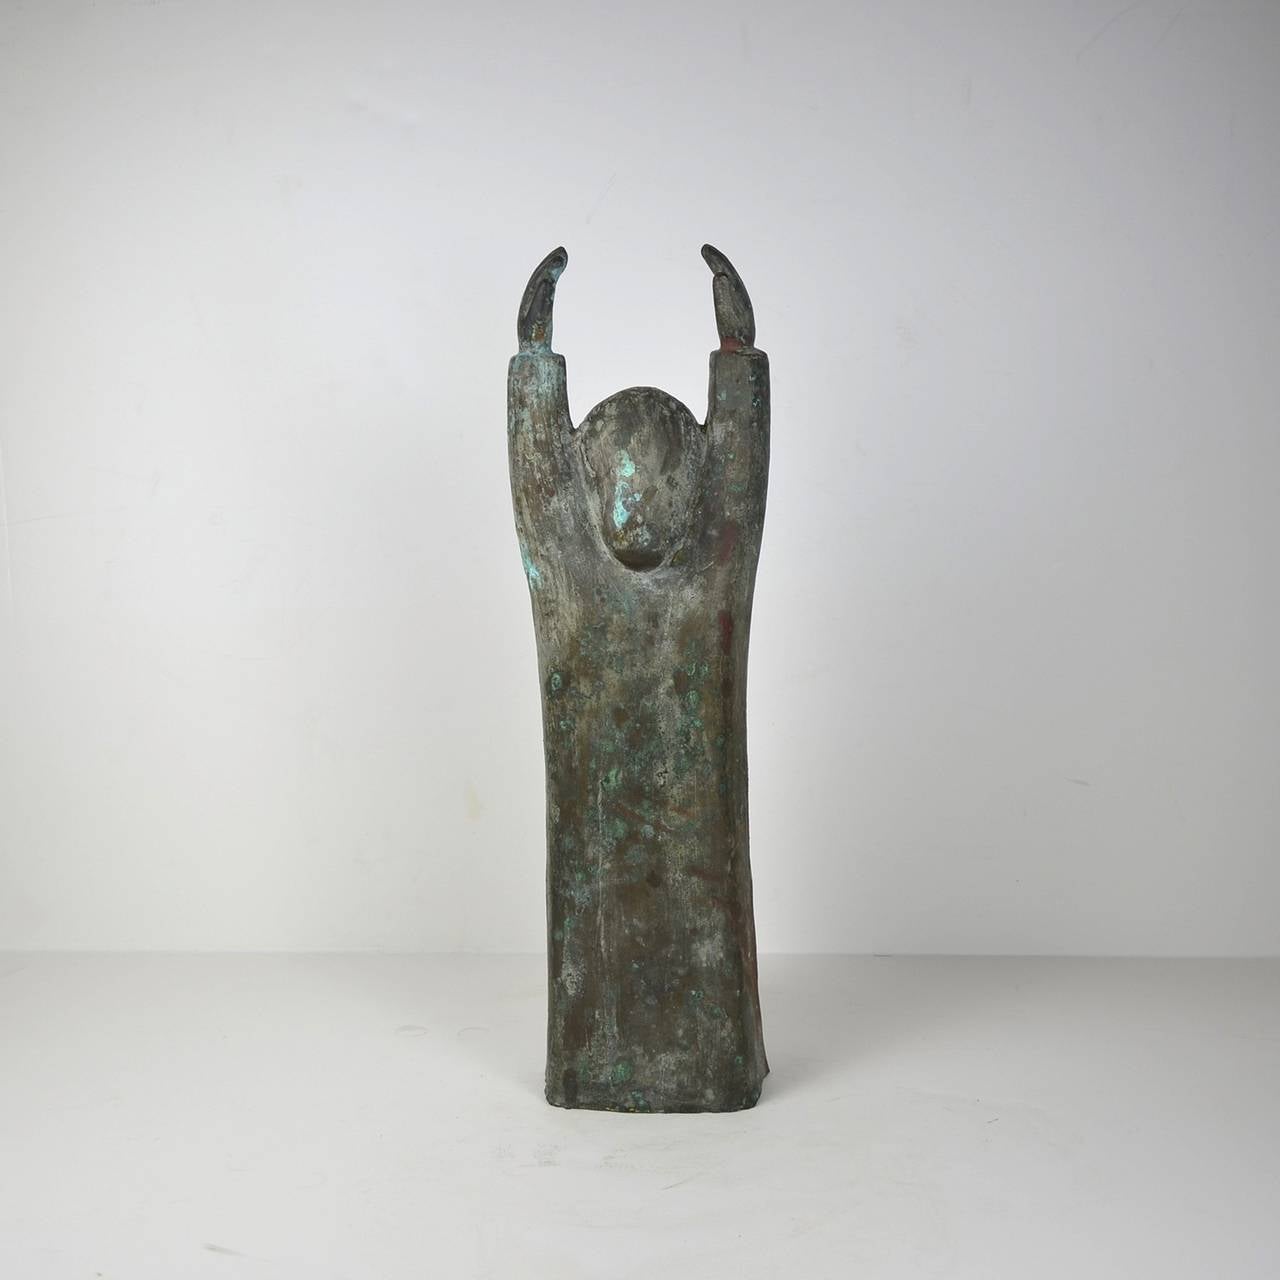 American Seated Nude Bronze Sculpture, 1960s, by Kurt Lehman For Sale